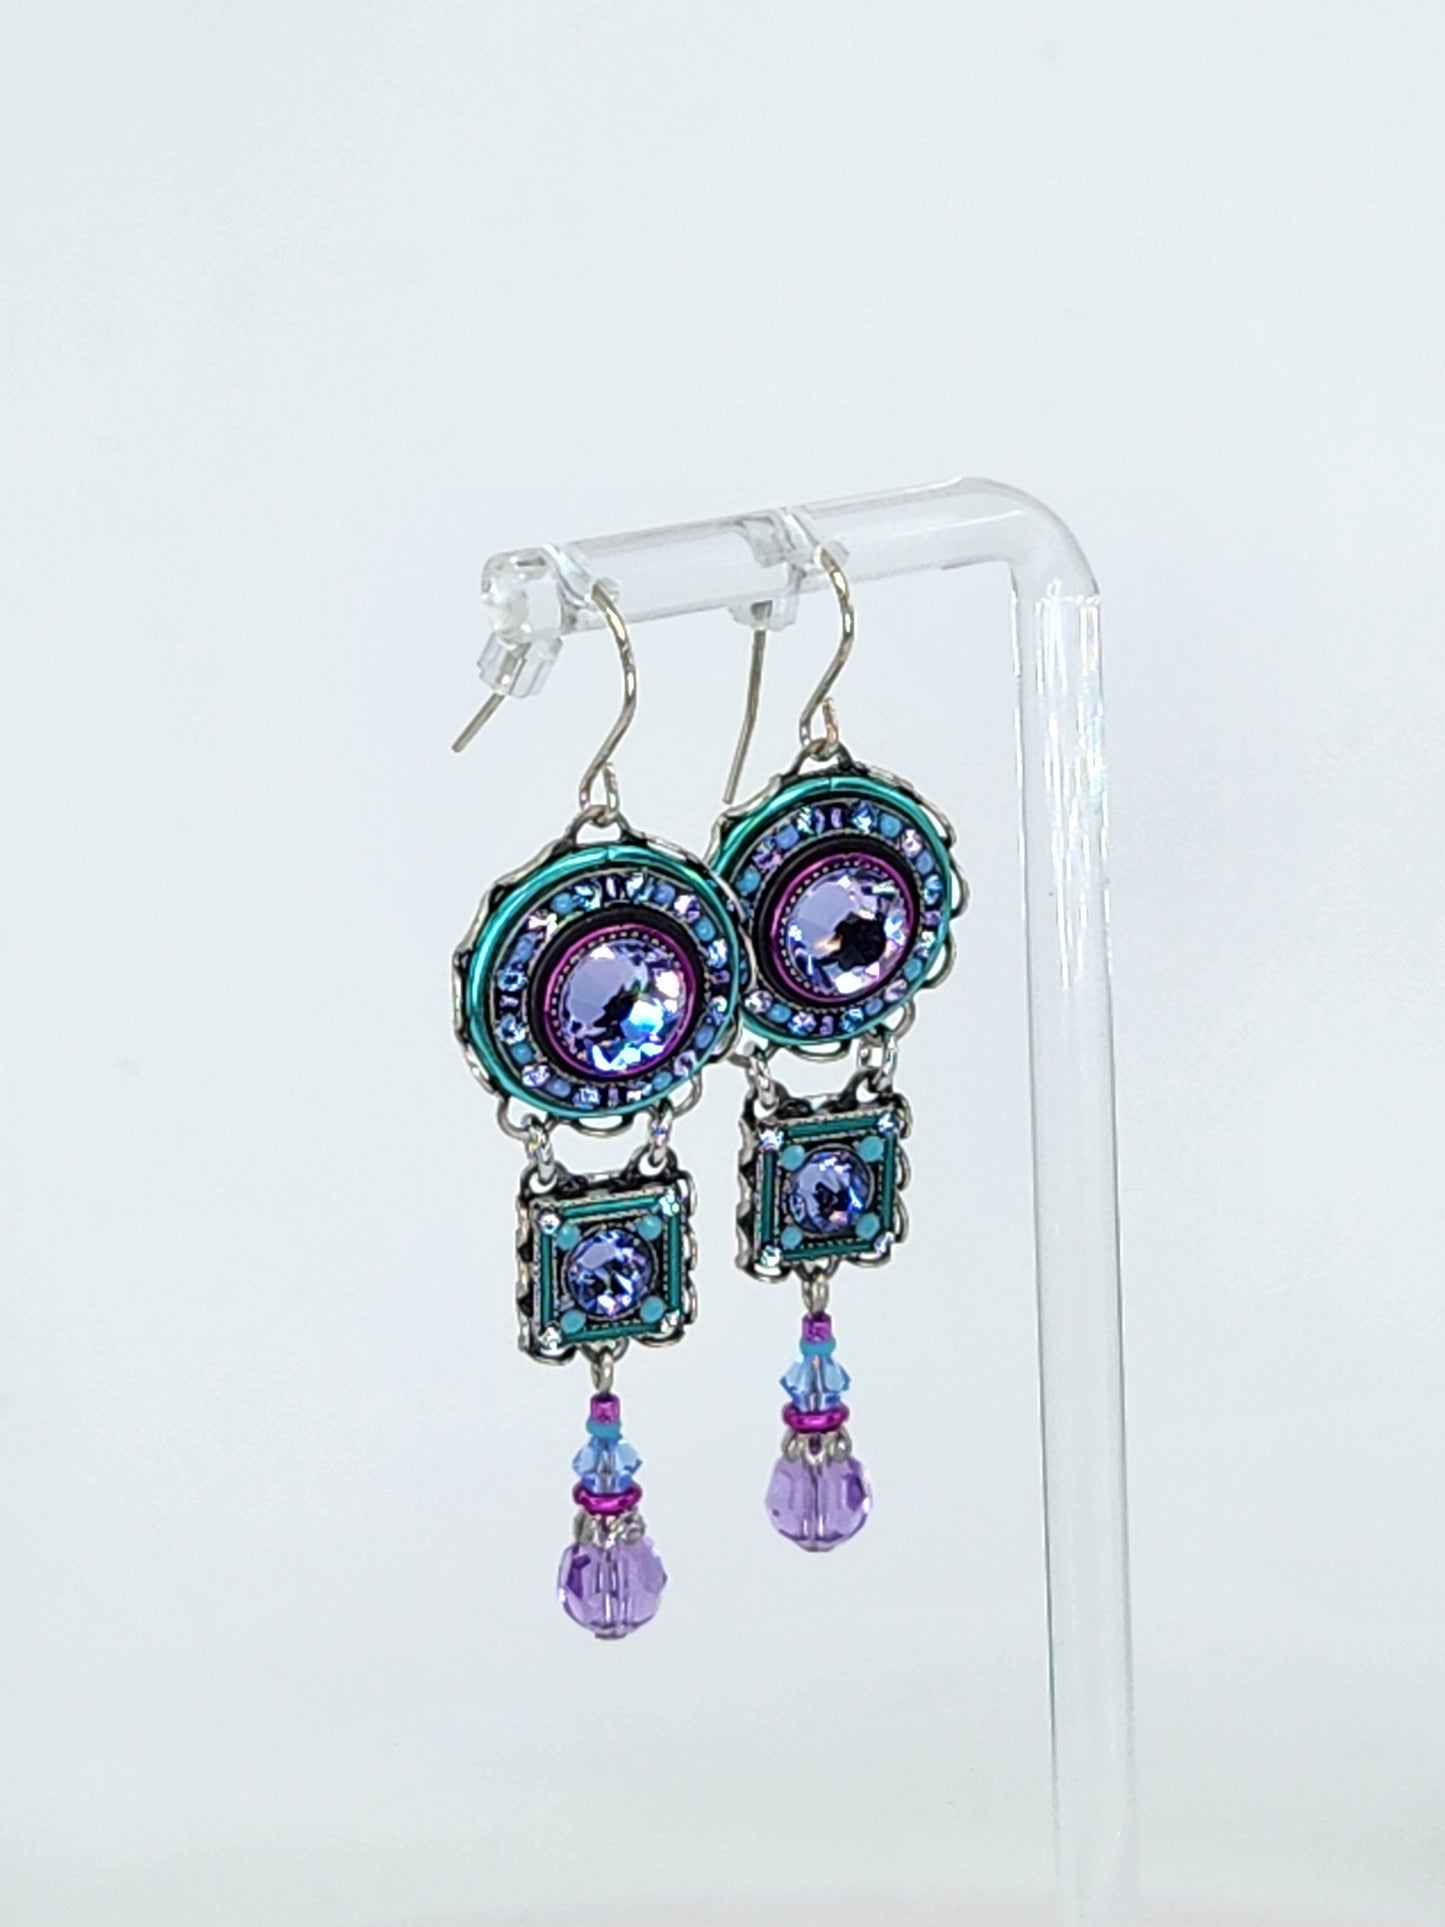 Firefly - Lavender and Blue Earrings with Swarovski Crystals